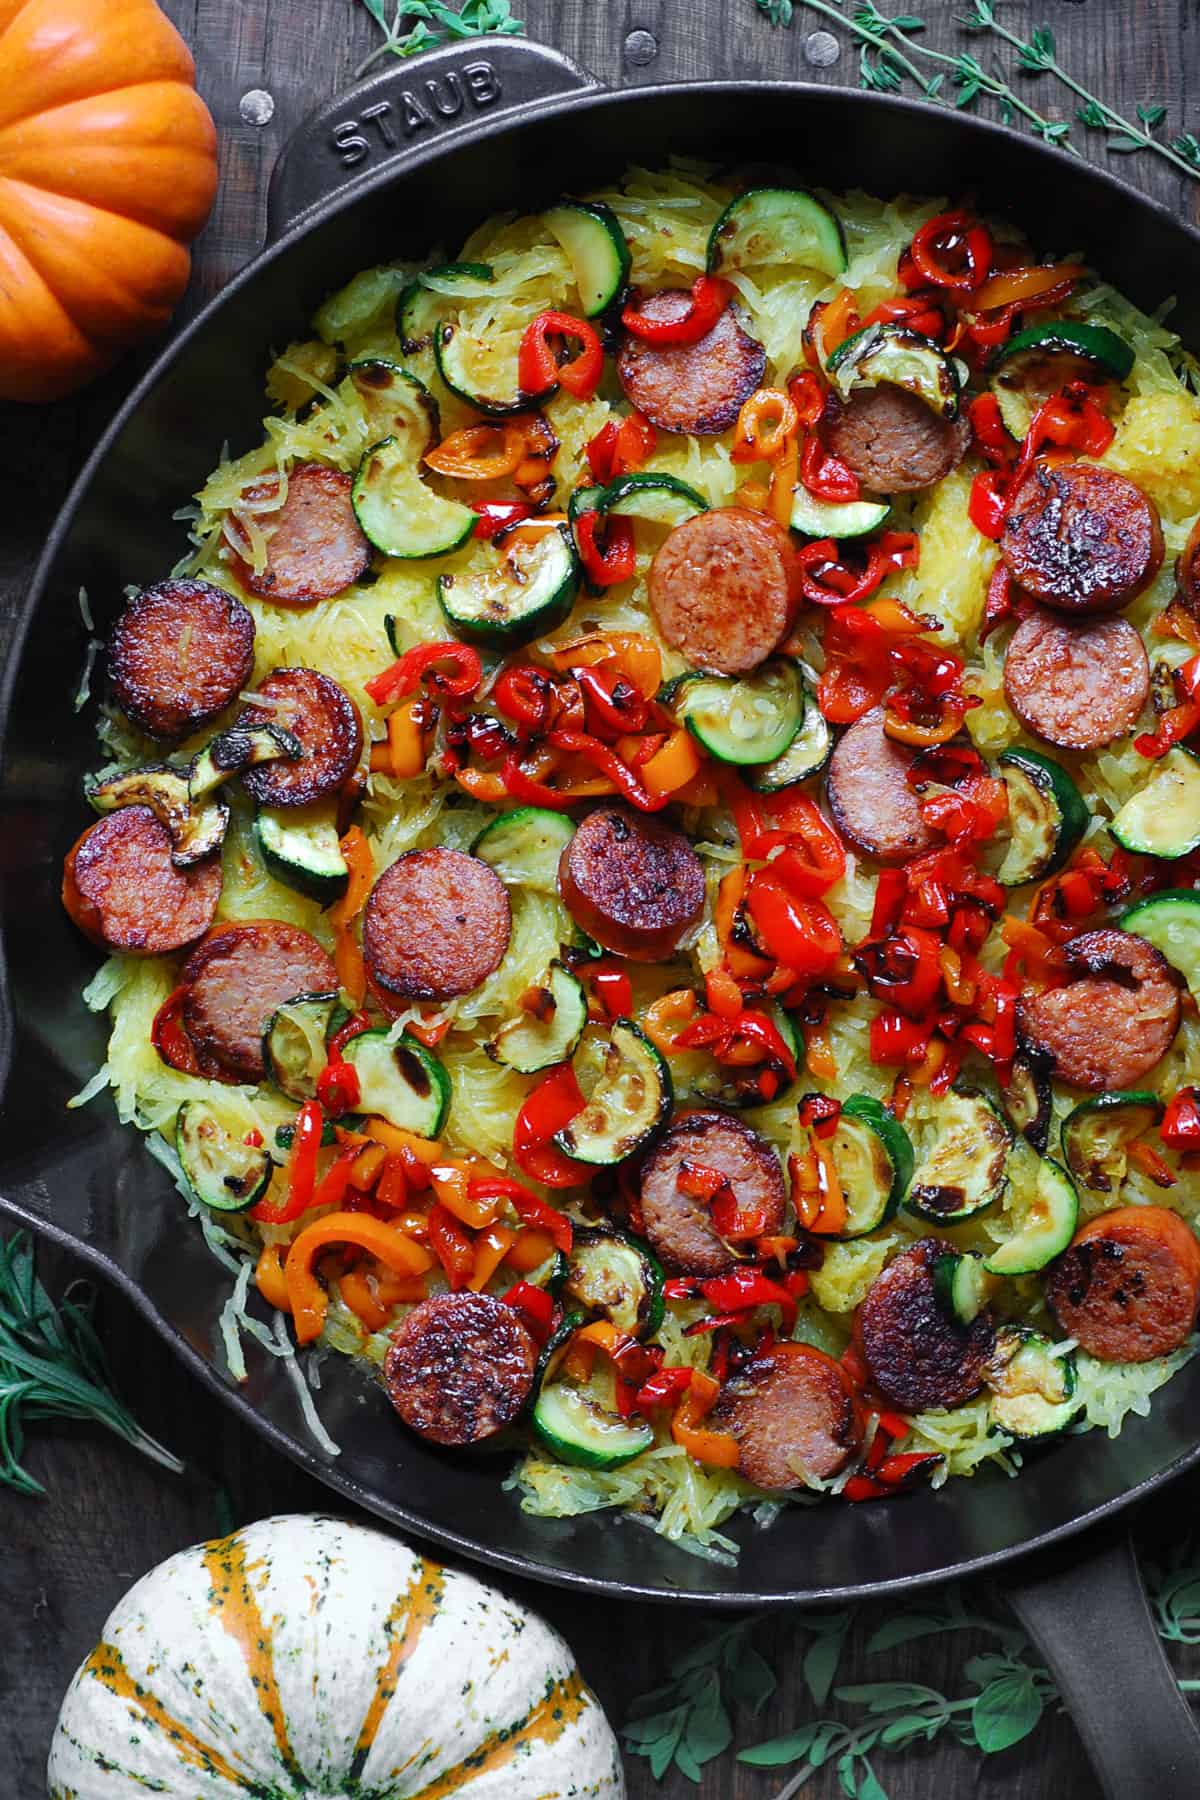 Scooped-out roasted spaghetti squash flesh, sliced smoked sausage, sliced cooked bell peppers, and zucchini - in a large cast iron skillet. 